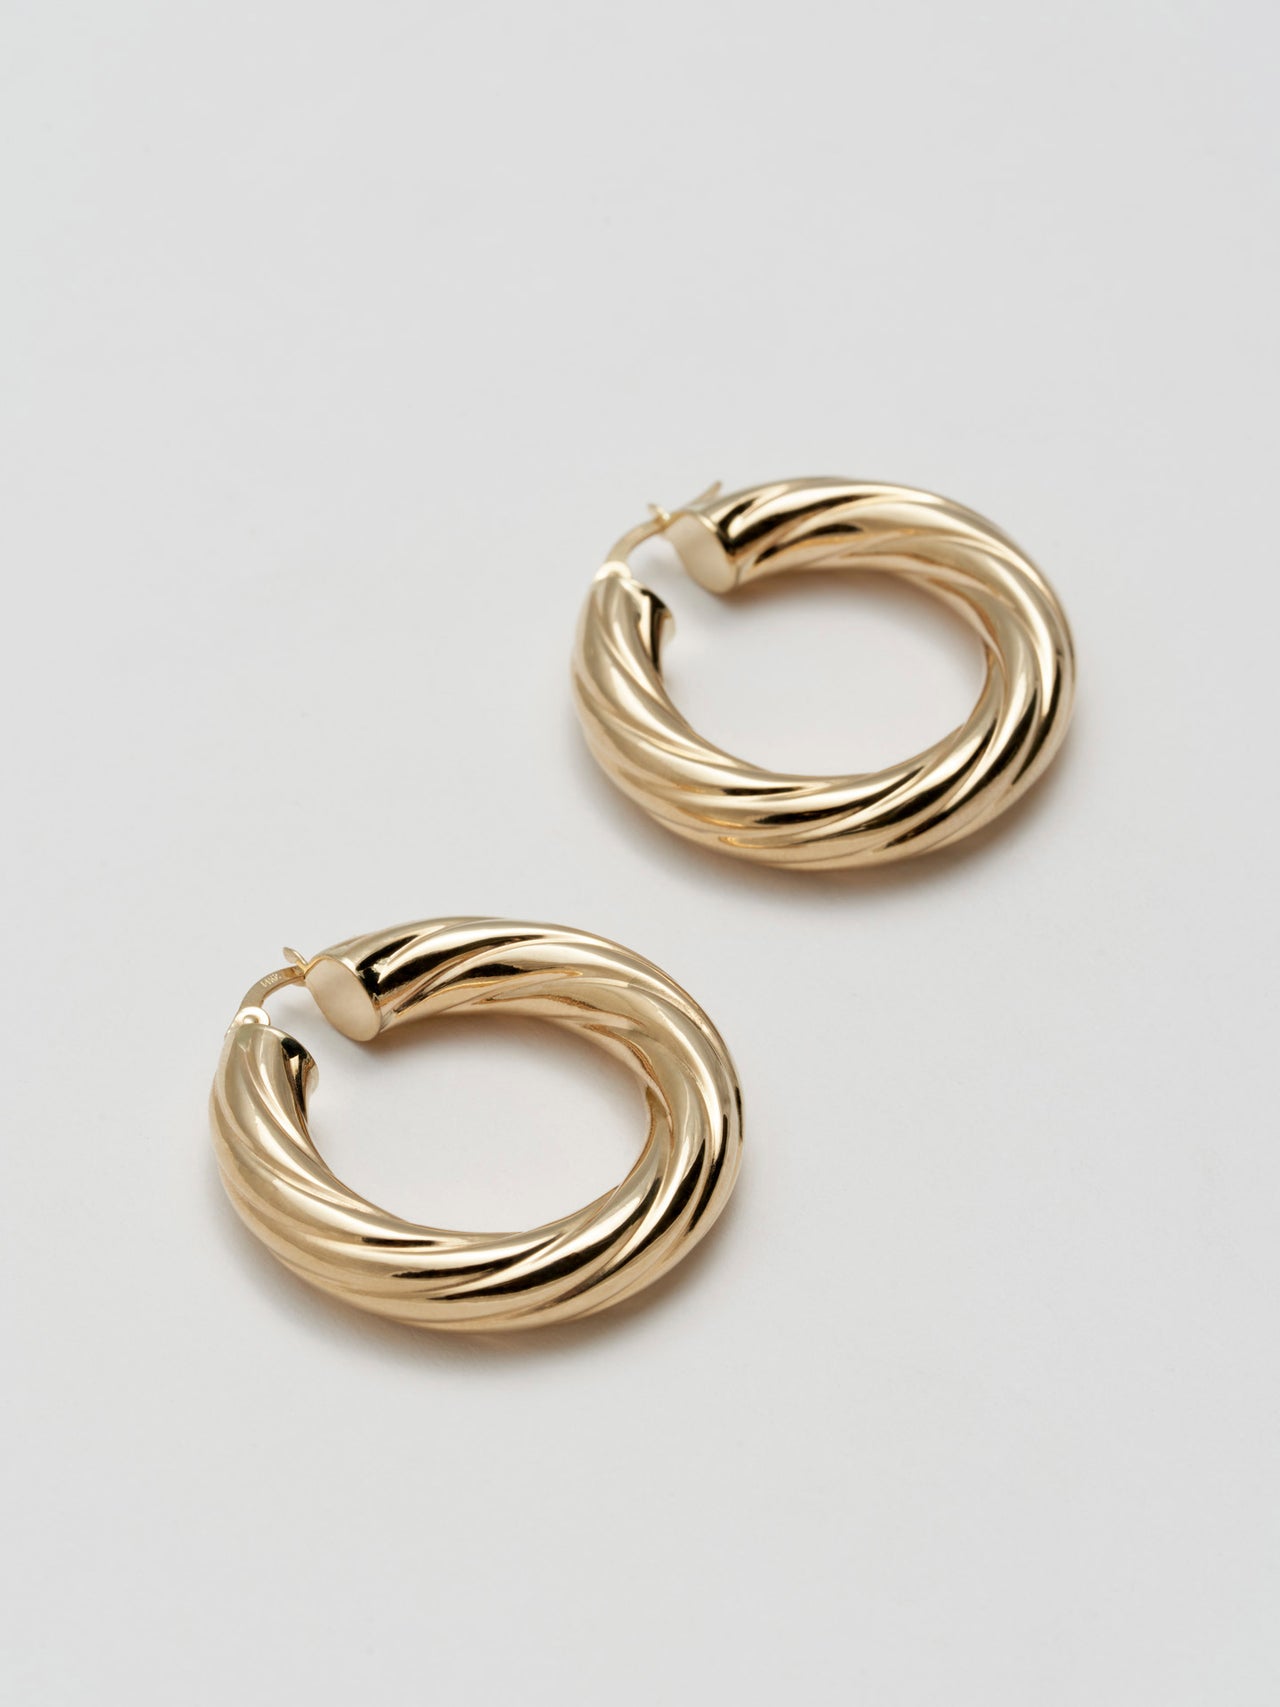 Side angle product shot of Whirlwind Hoops (14Kt Yellow Gold Hoop Earrings Diameter: 30mm Thickness: 6mm) Shoot on white background